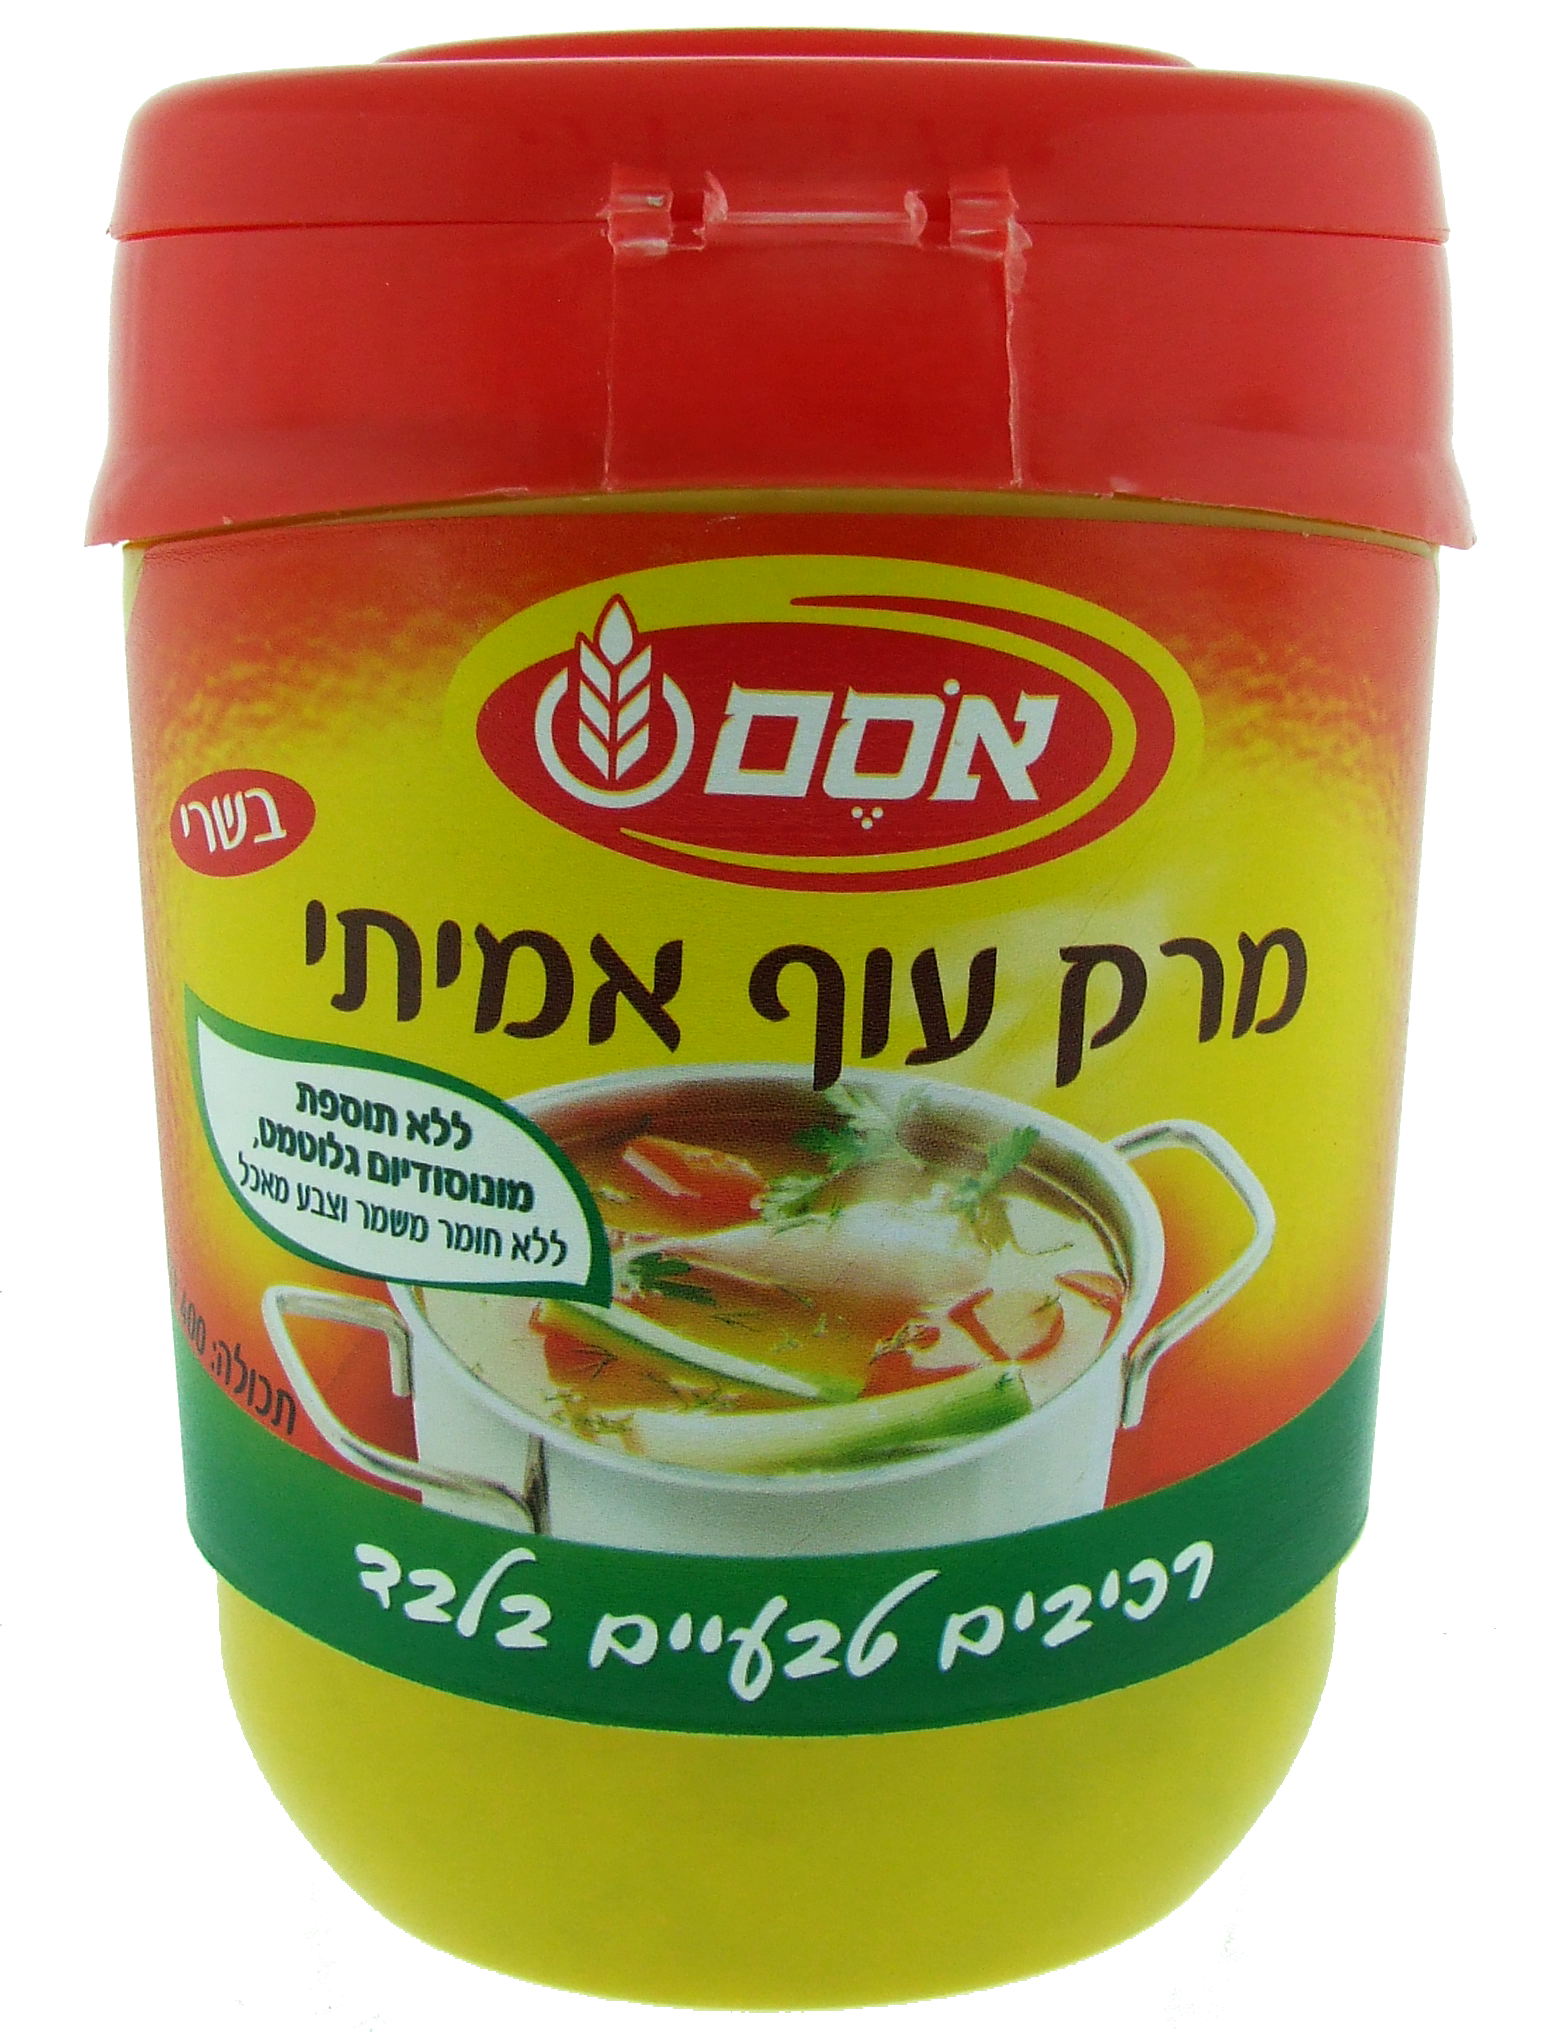 Save on Osem Instant Soup & Seasoning Mix Chicken Style Consomme